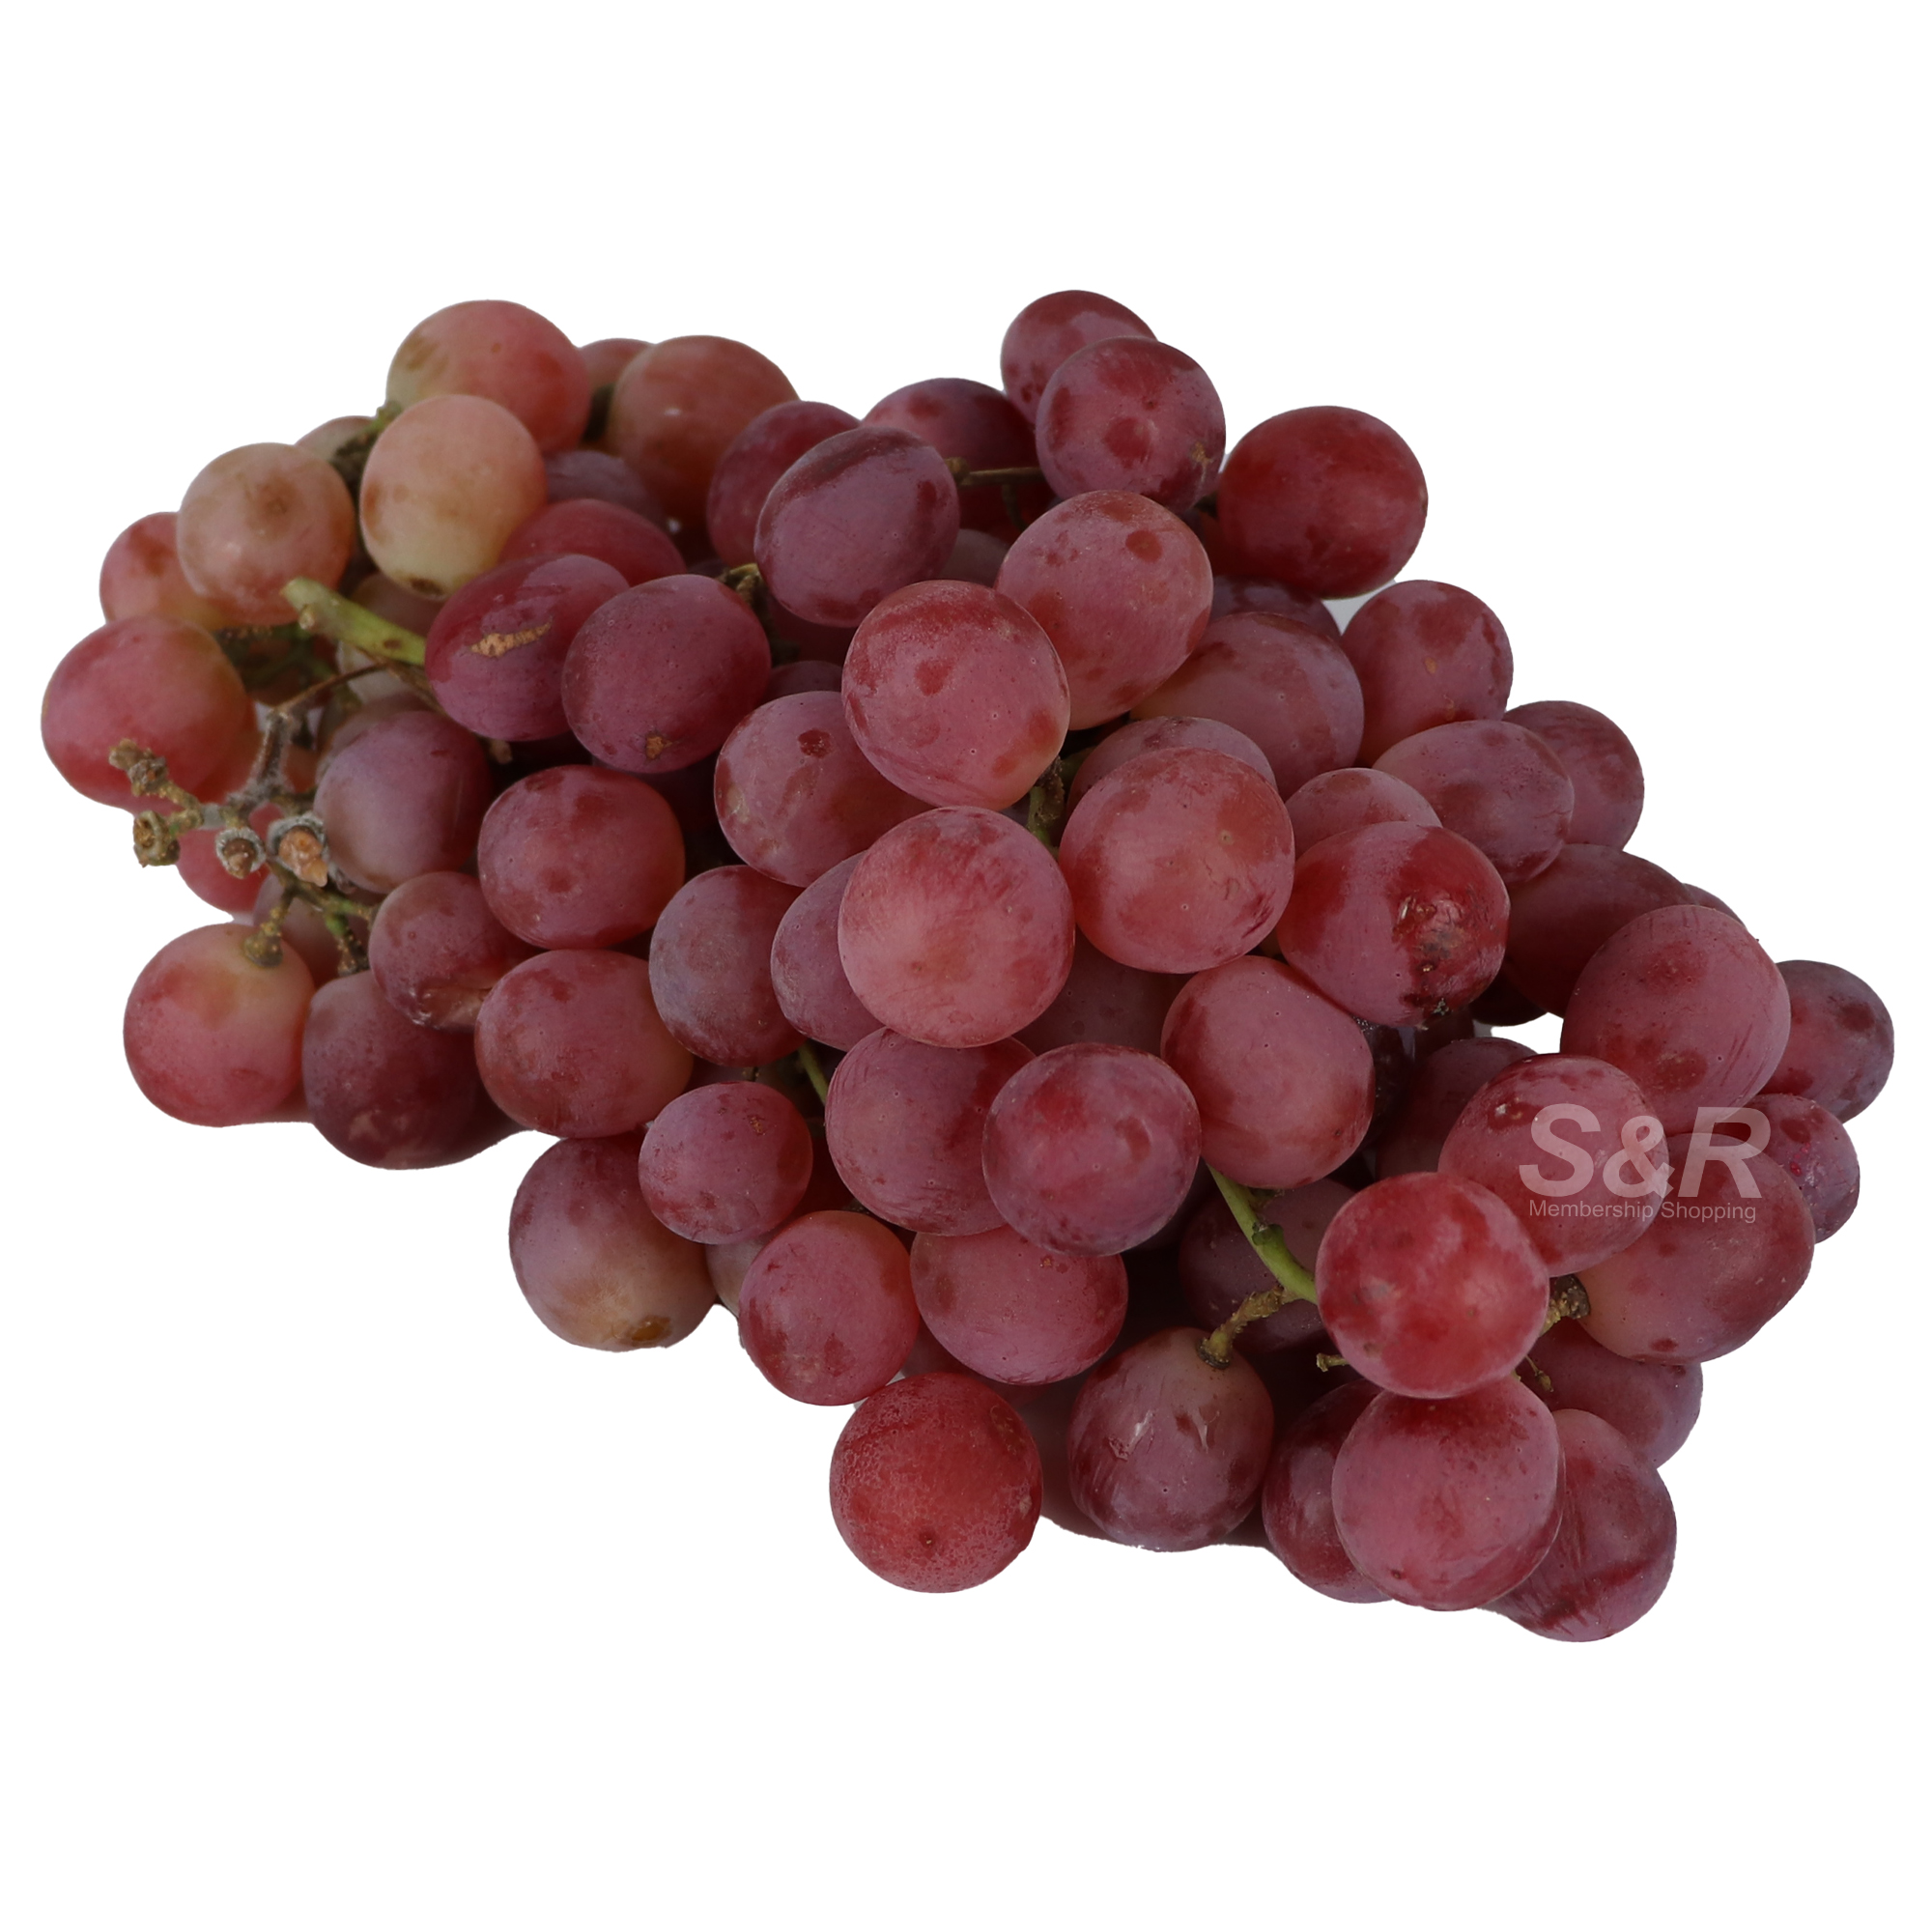 S&R Seeded Red Globe Grapes approx. 1.3kg